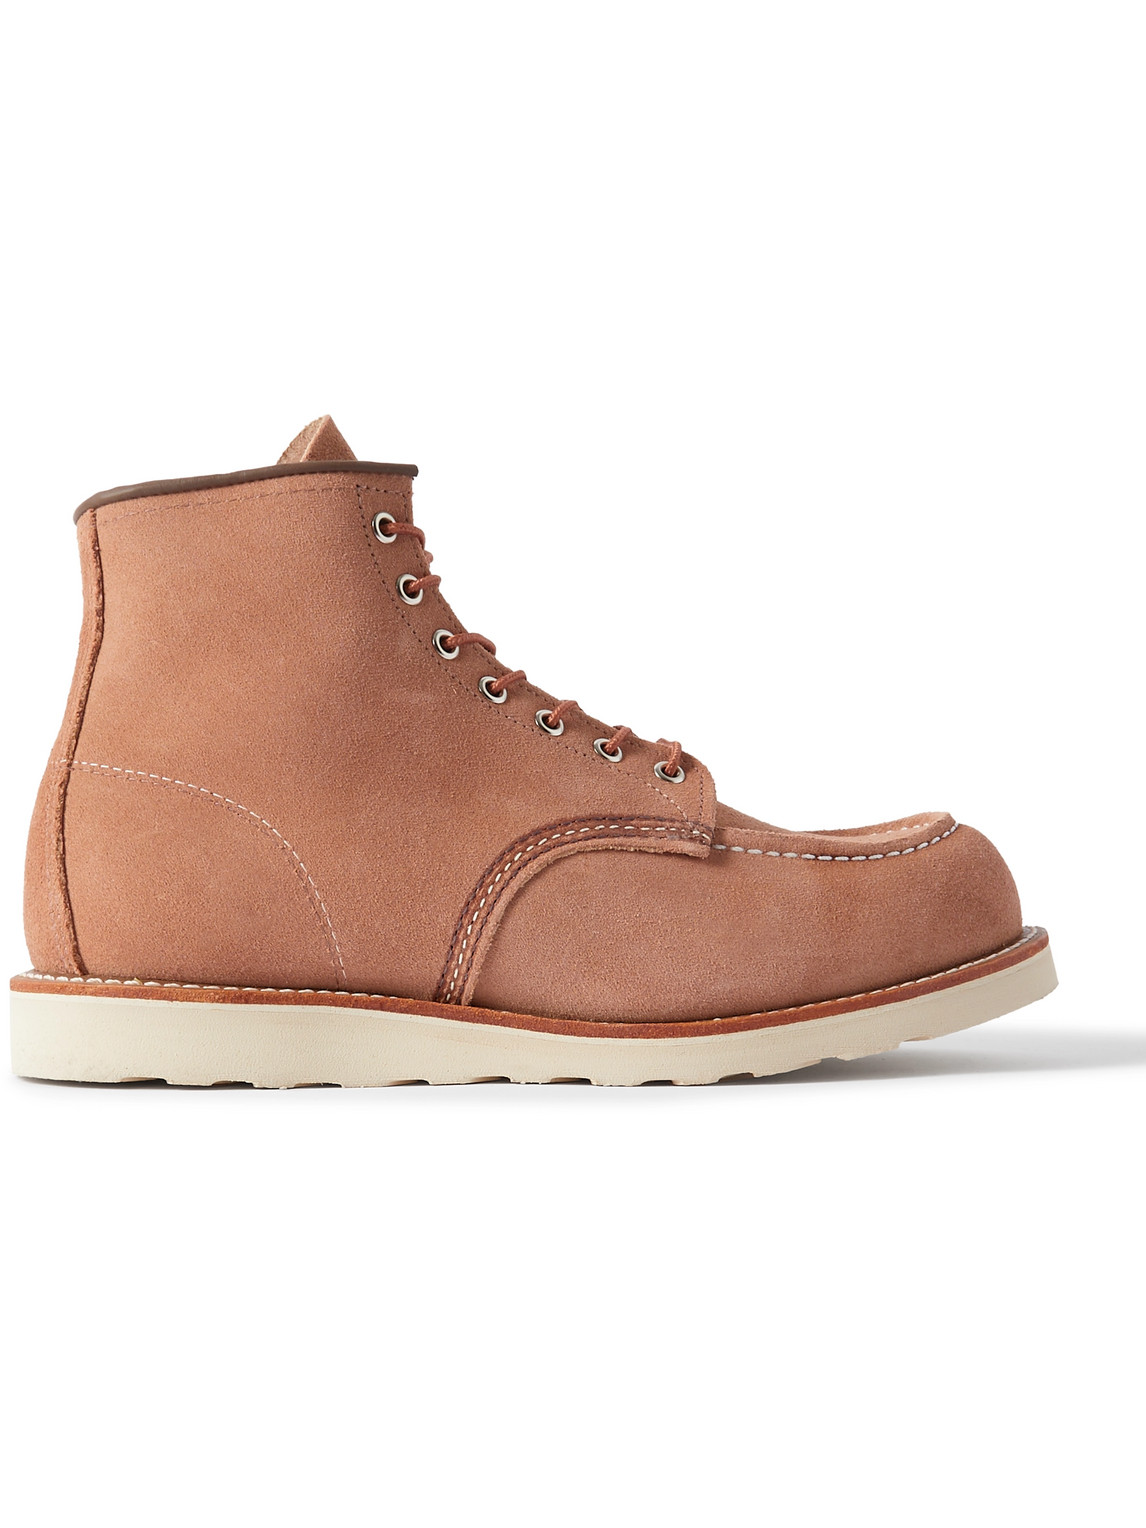 RED WING SHOES 8208 CLASSIC MOC SUEDE BOOTS